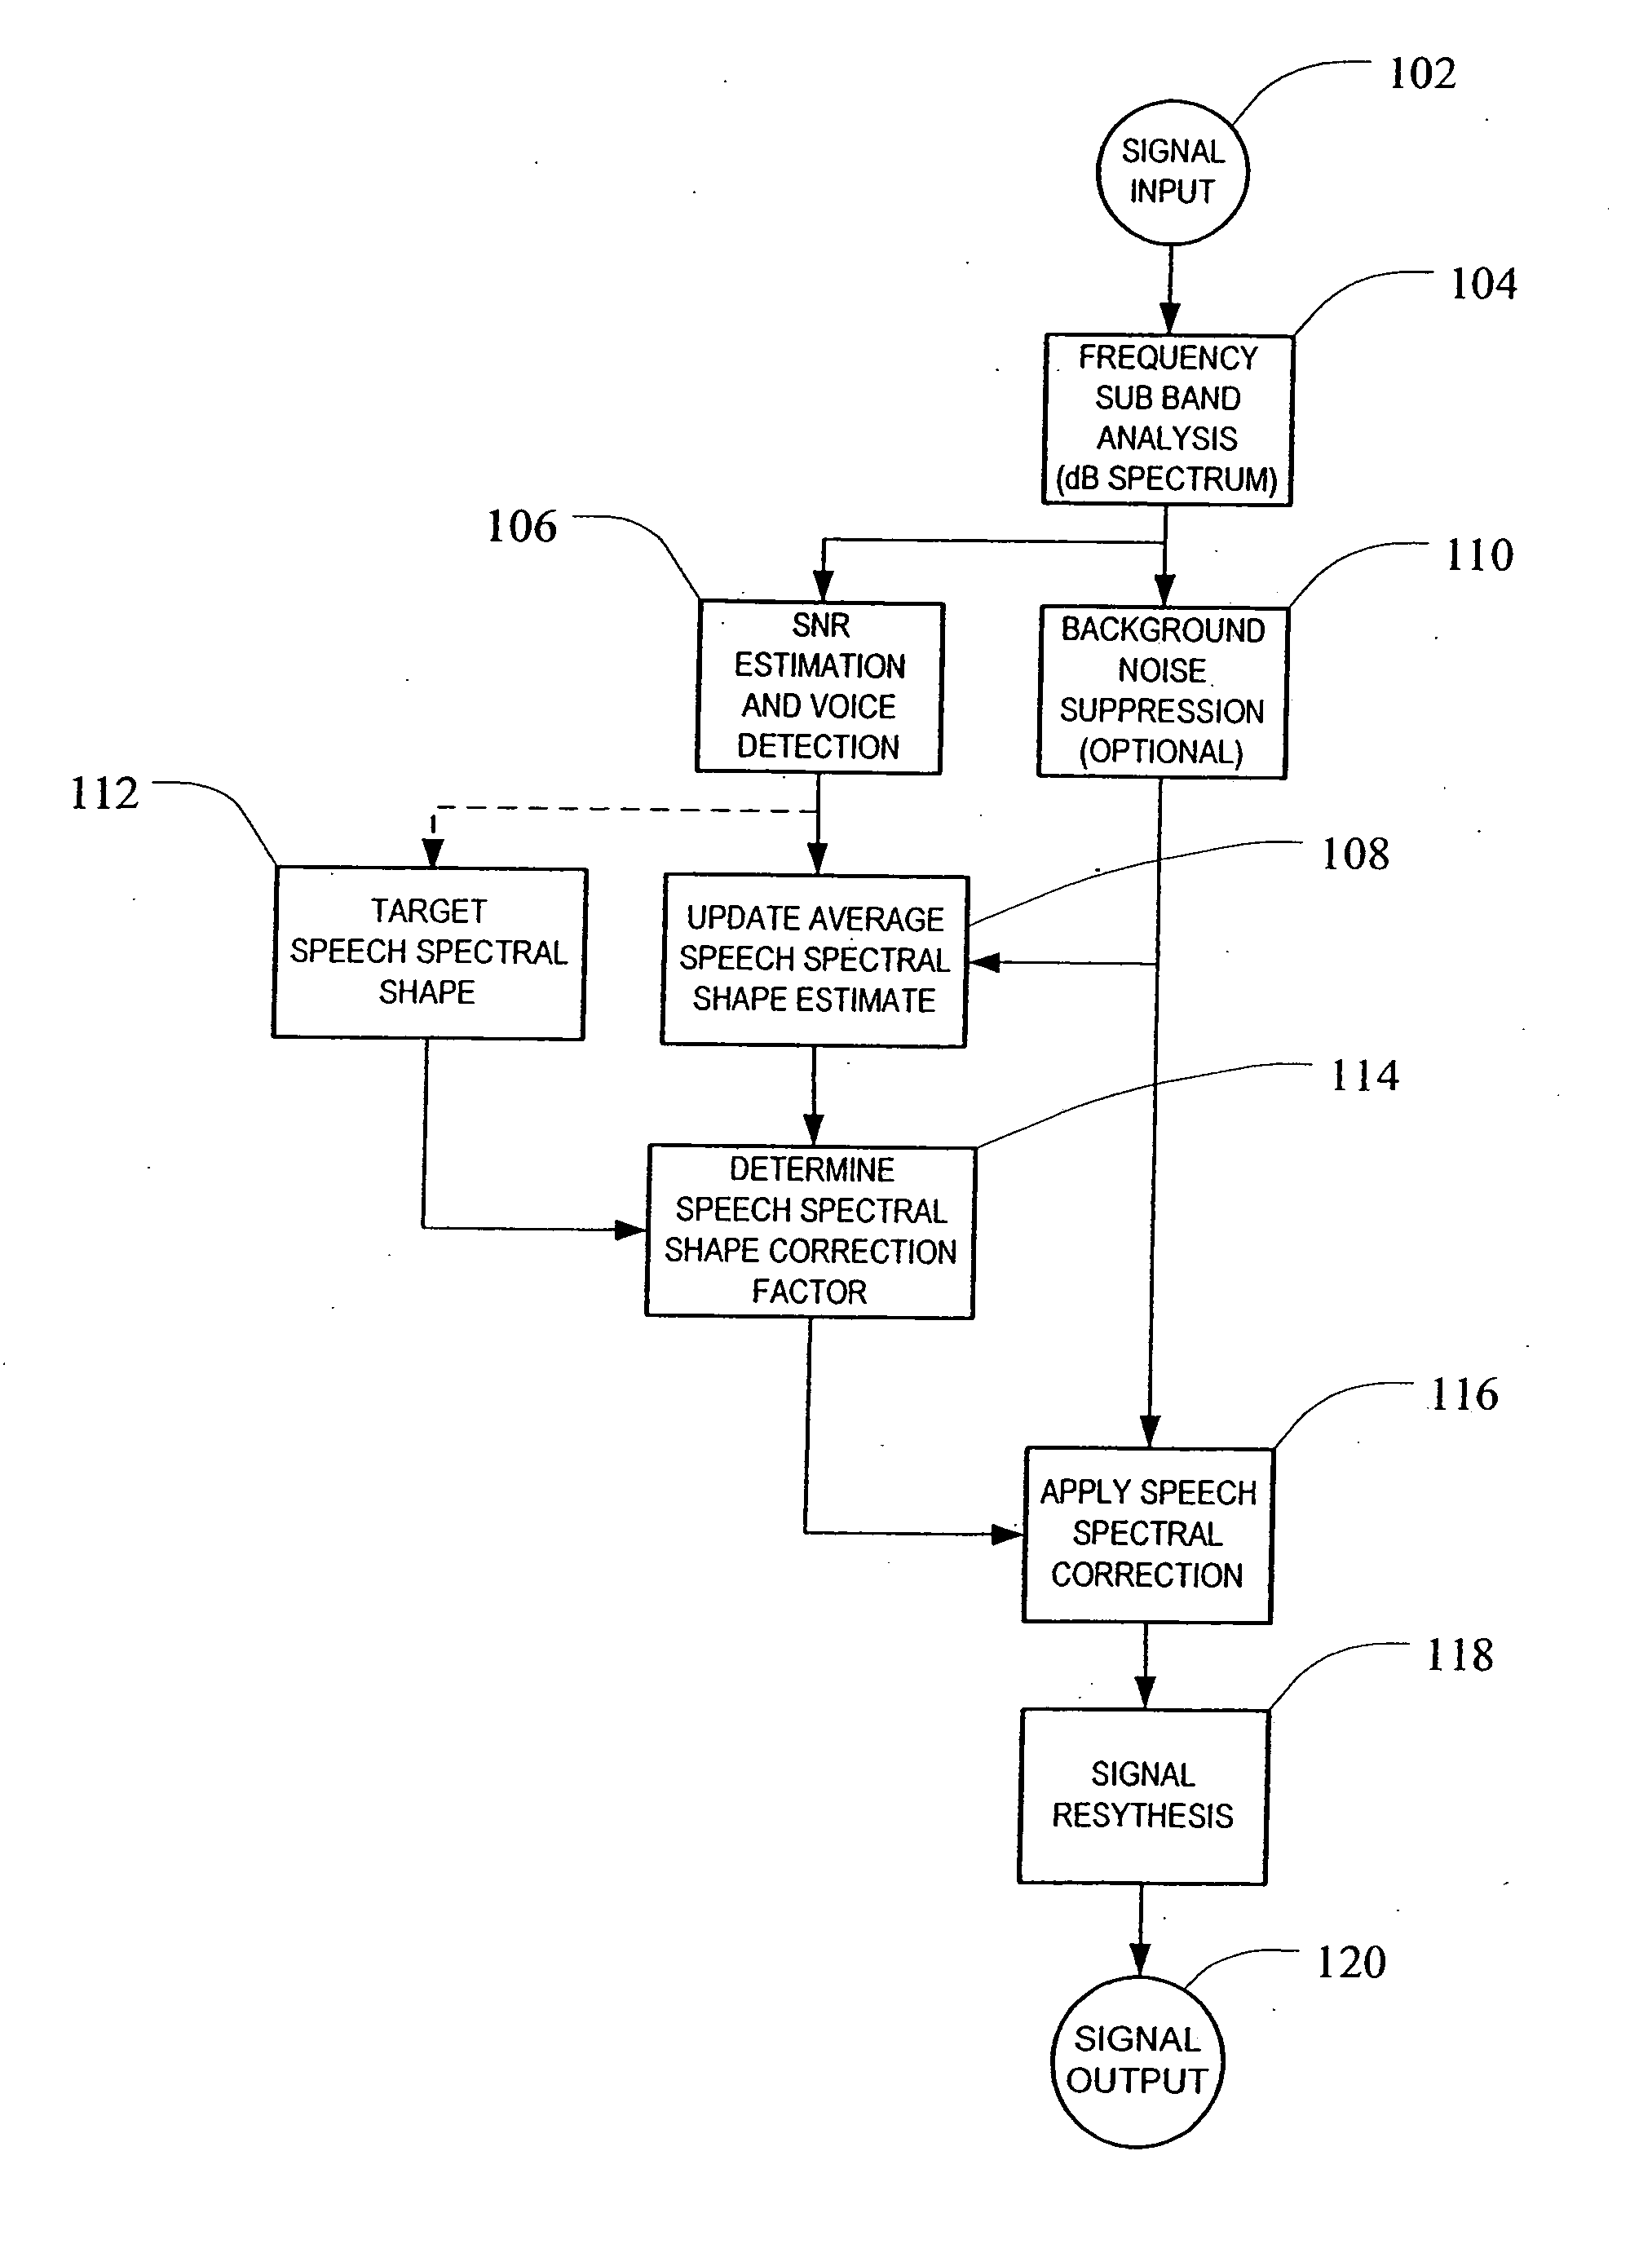 System and method for adaptive enhancement of speech signals